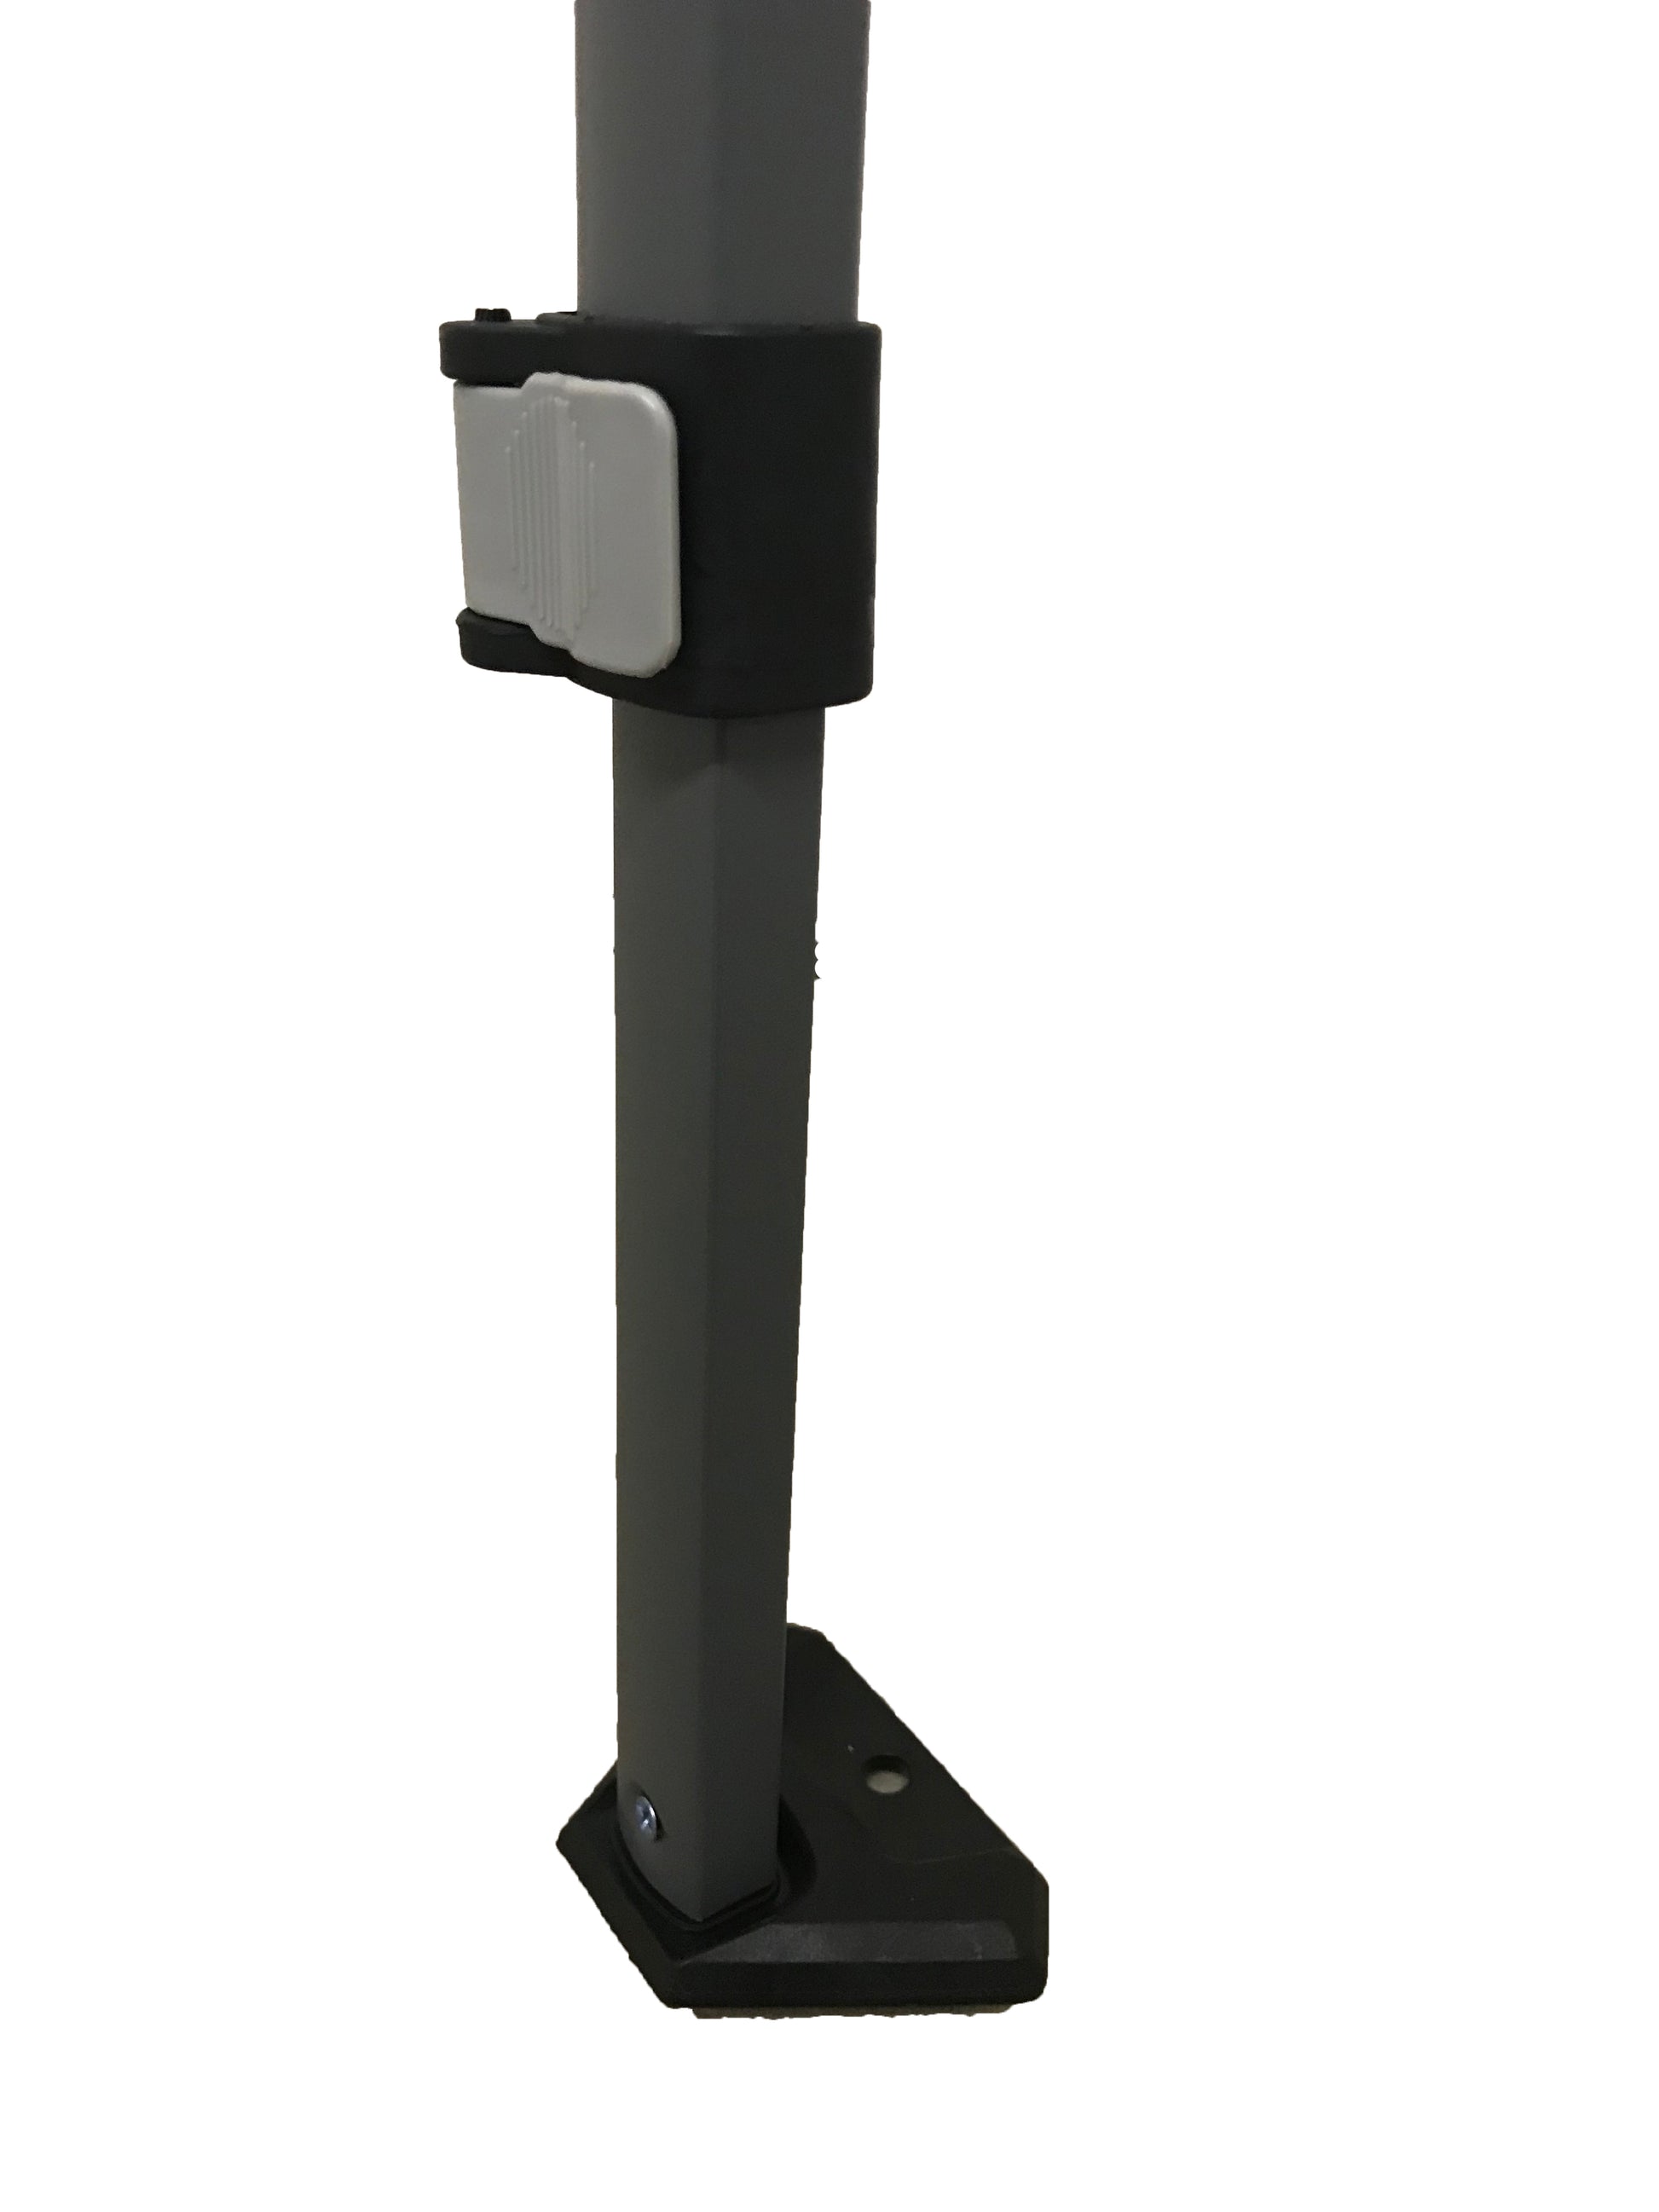 The image features a close-up of a black tent leg with a square-shaped foot for stability. Attached to the leg is a white push-button mechanism, typically used for adjusting the height or securing the leg in place. The leg is constructed of a material that appears to be metal, and the foot is secured with visible screws, suggesting the structure is designed for durability and outdoor use.